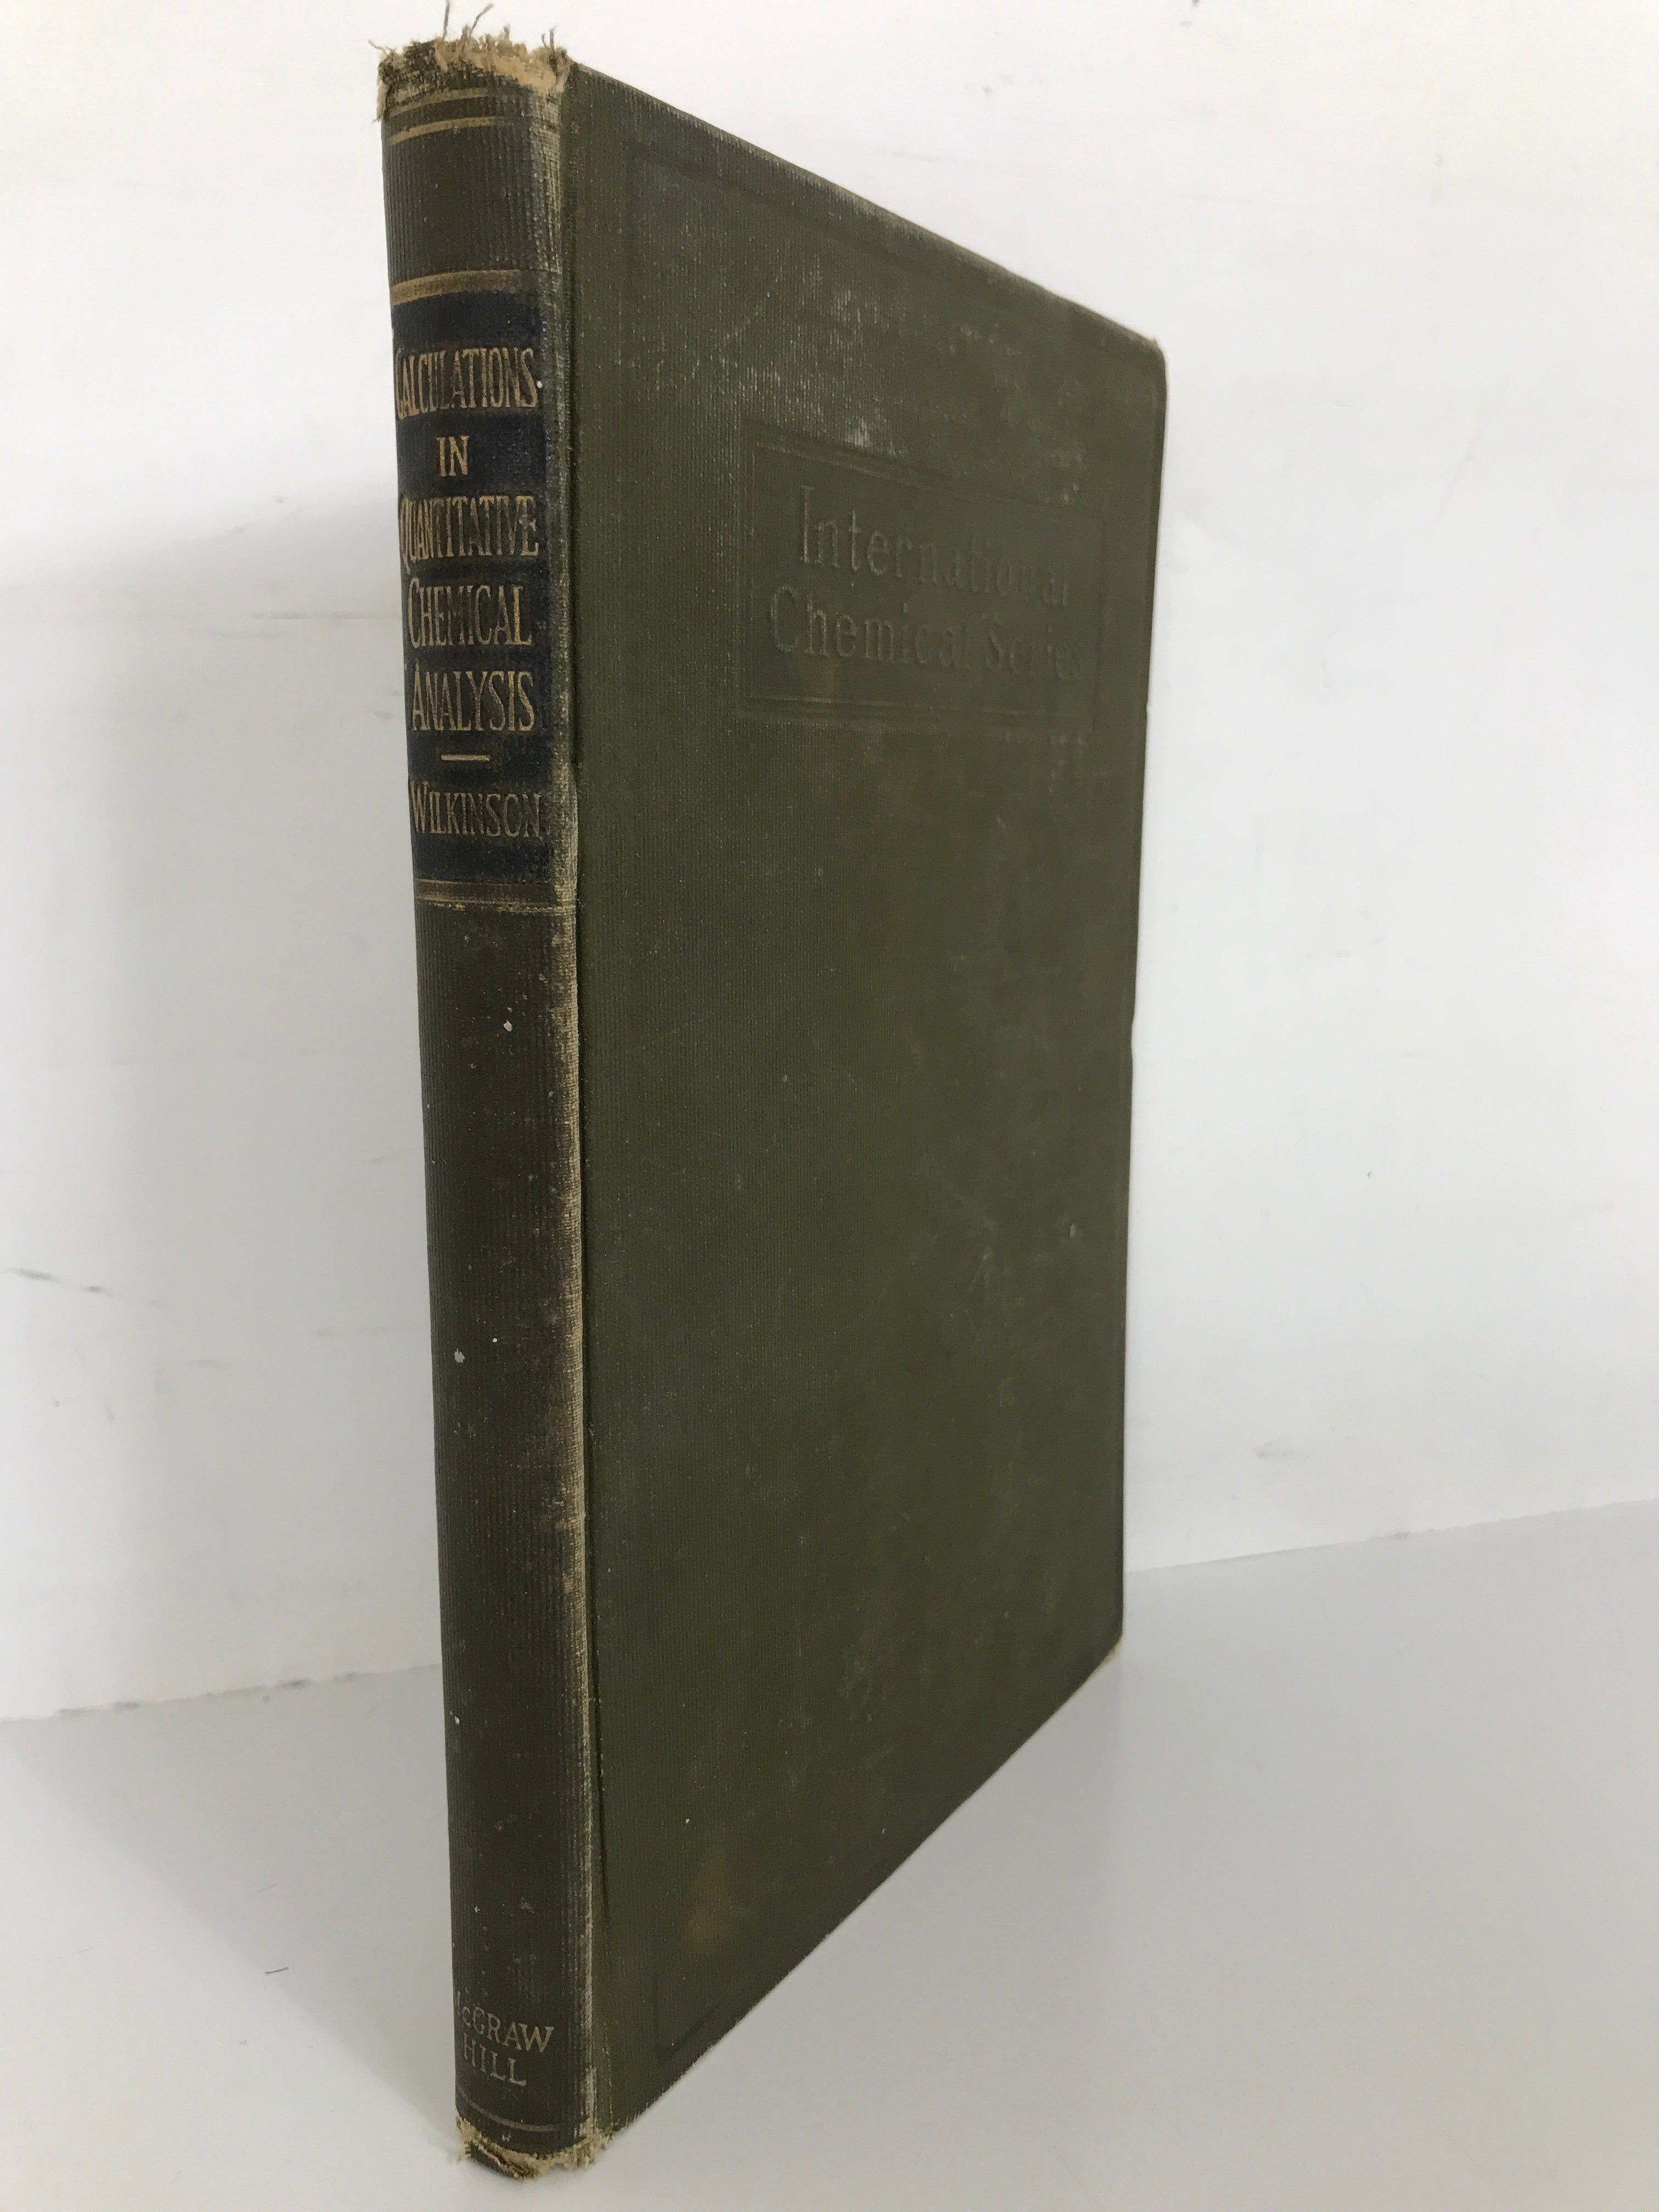 Calculations in Quantitative Chemical Analysis 1st Edition 1928 by Wilkinson HC